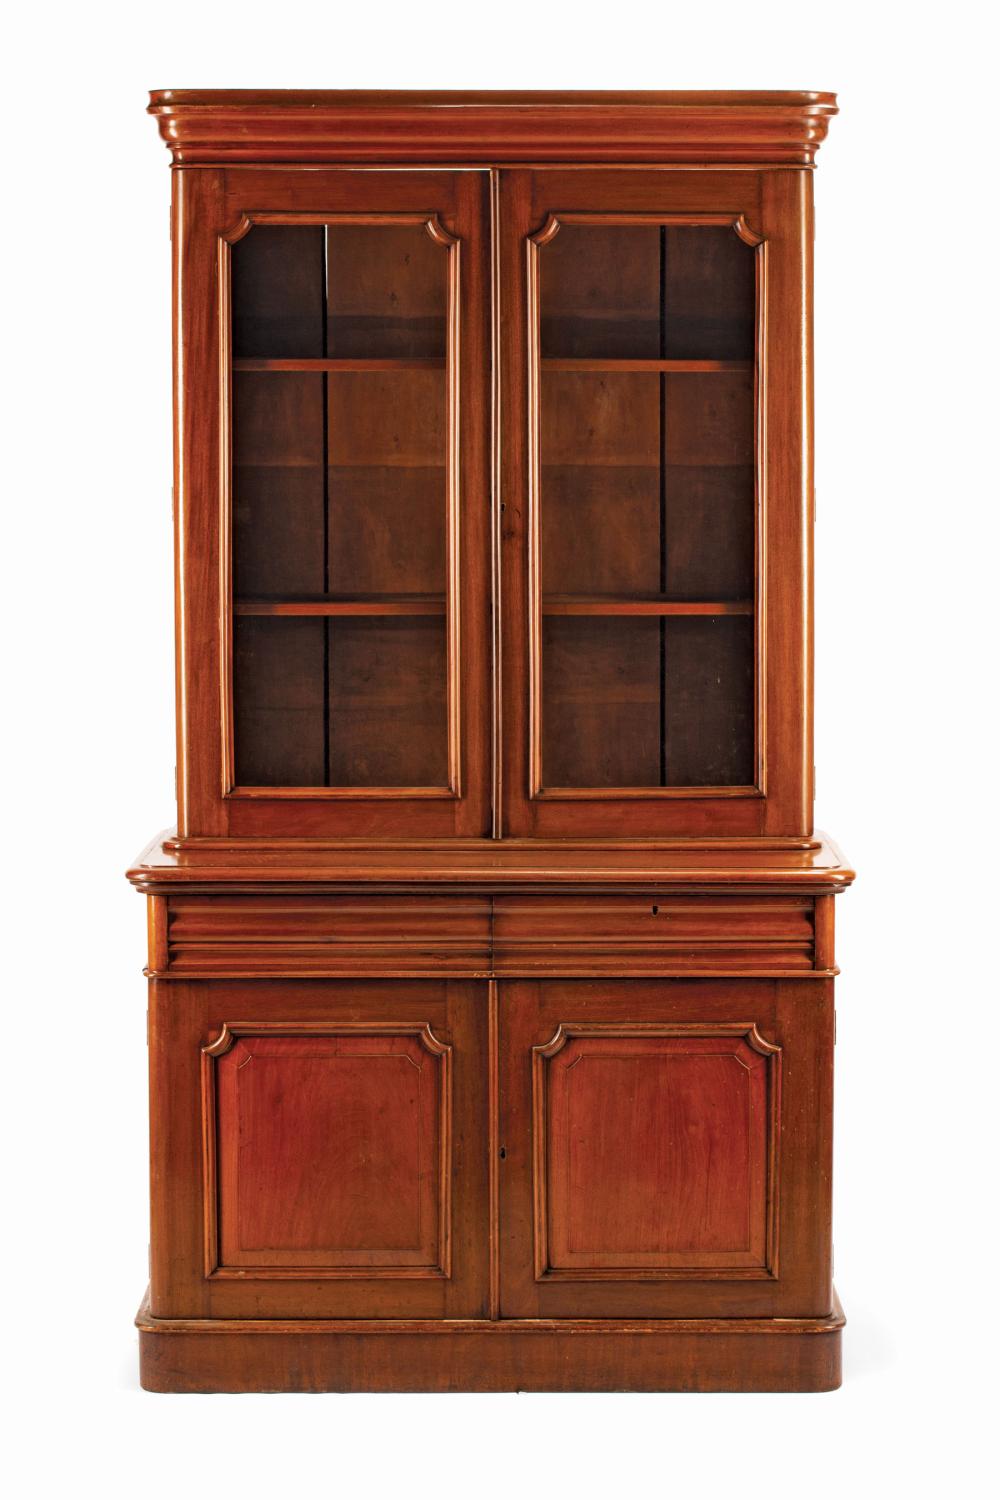 LOUIS PHILIPPE MAHOGANY BOOKCASELouis